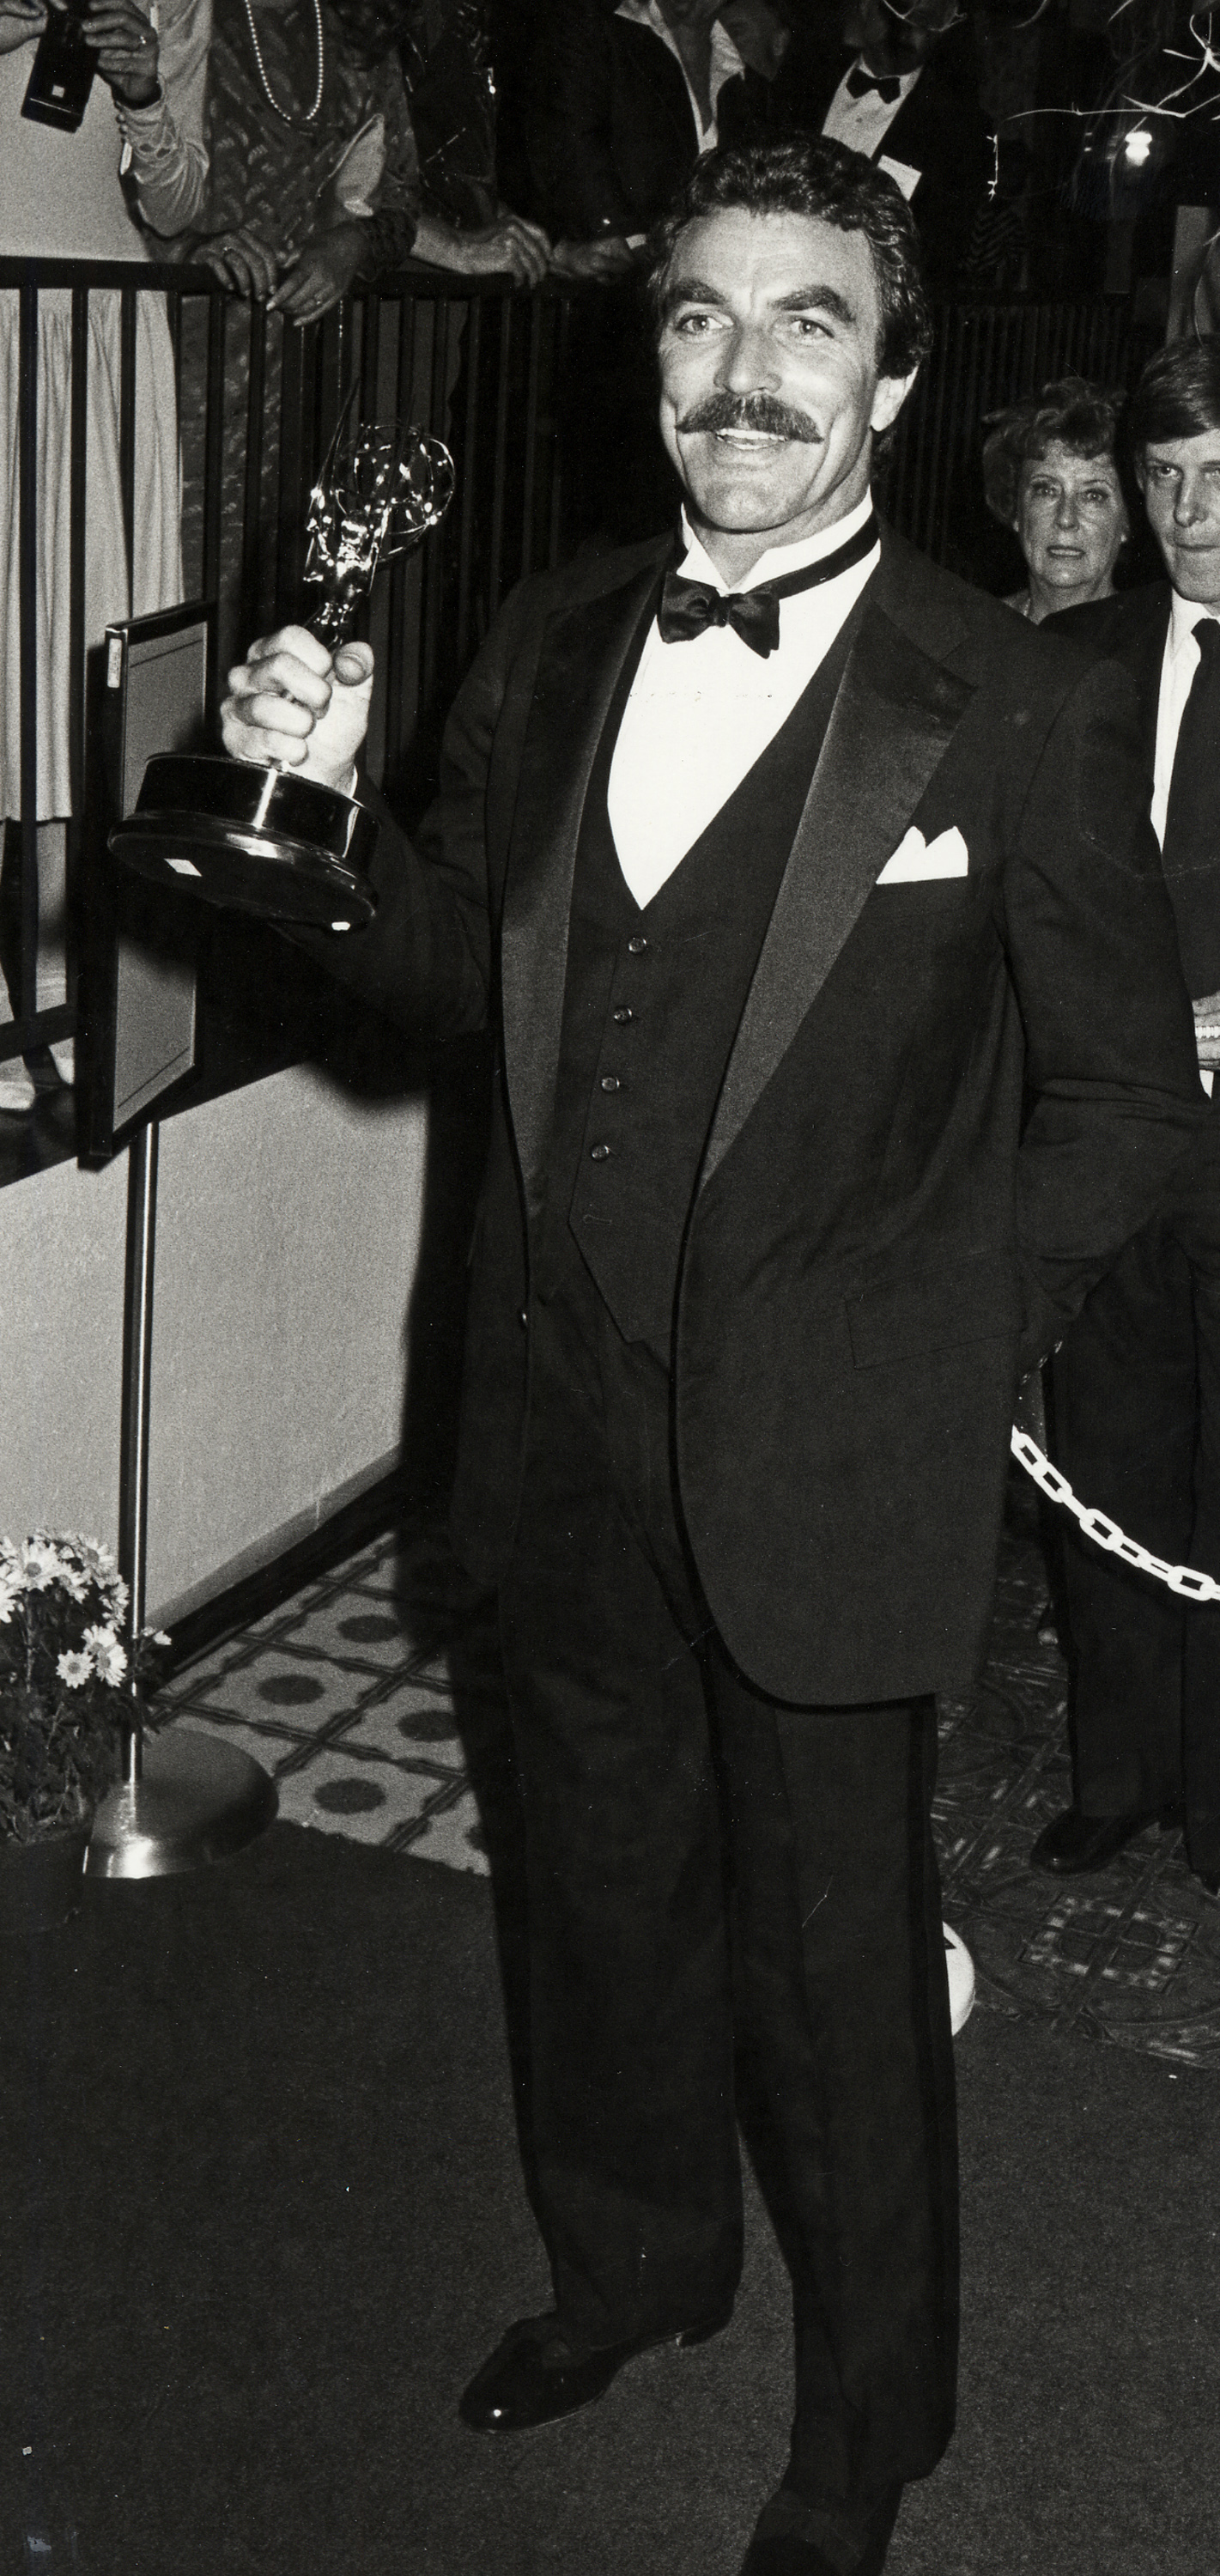 Tom Selleck at the 36th Annual Emmy Awards with his winning trophy. (Ron Galella, Ltd.—WireImage)